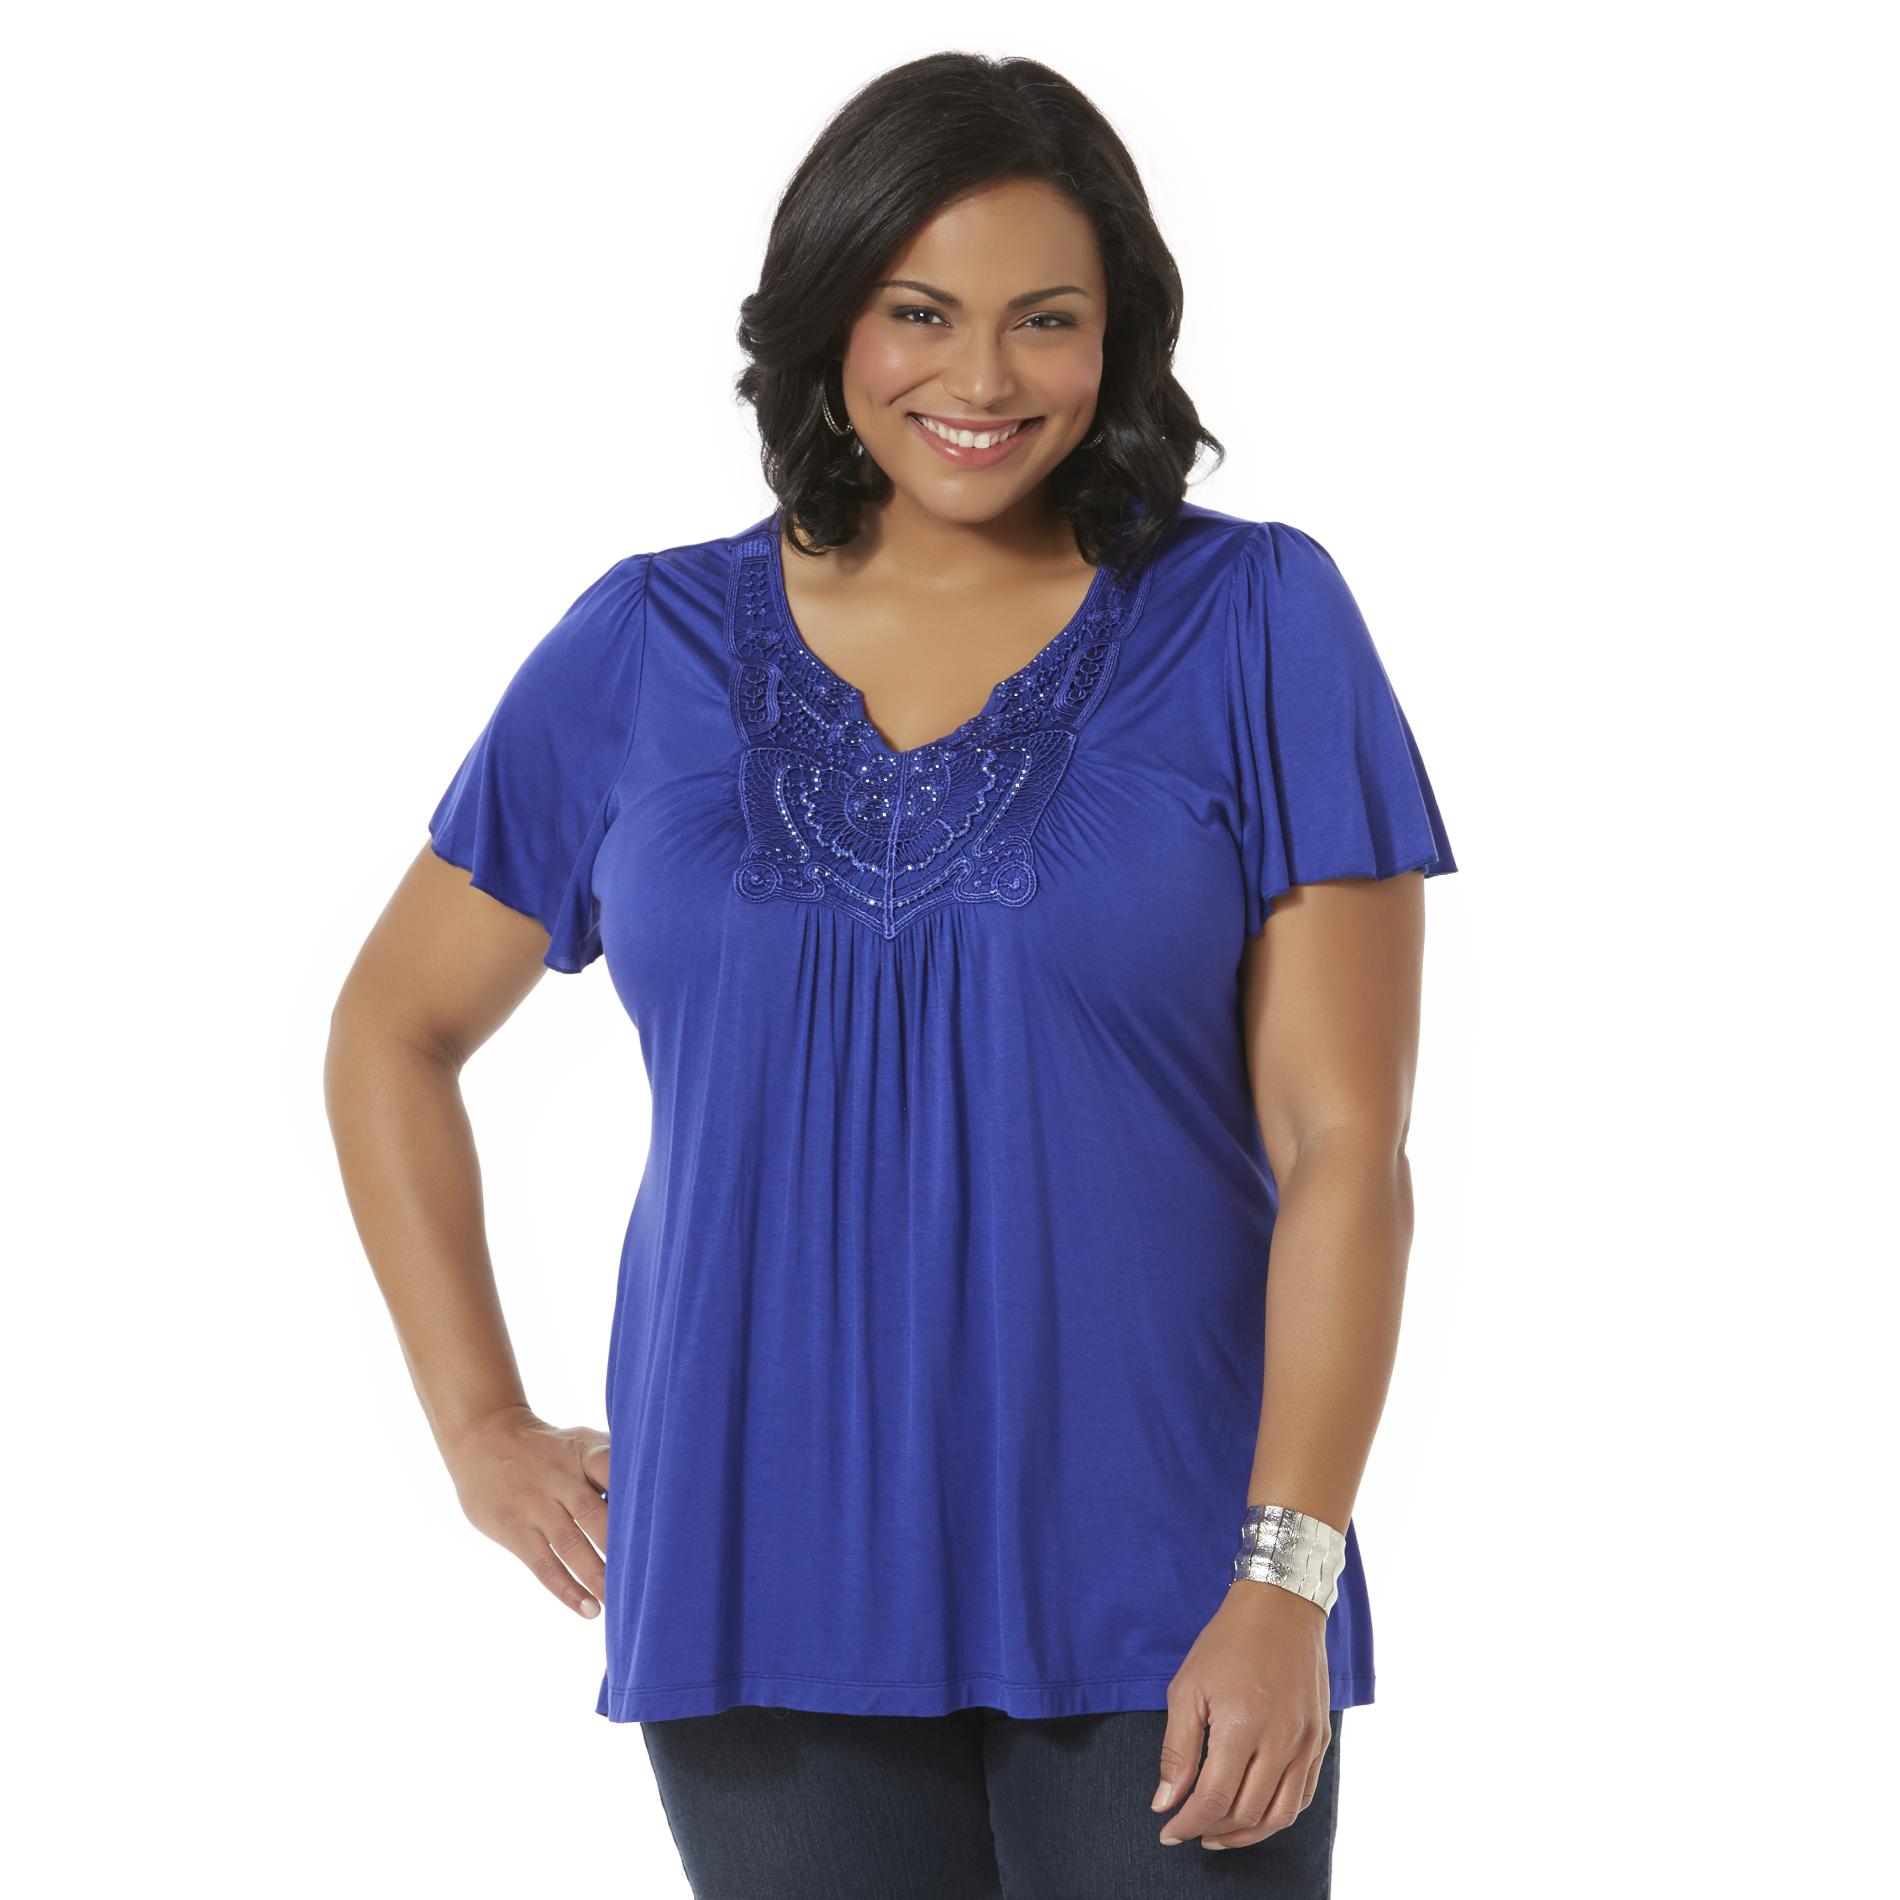 Live and Let Live Women's Plus Embellished Top